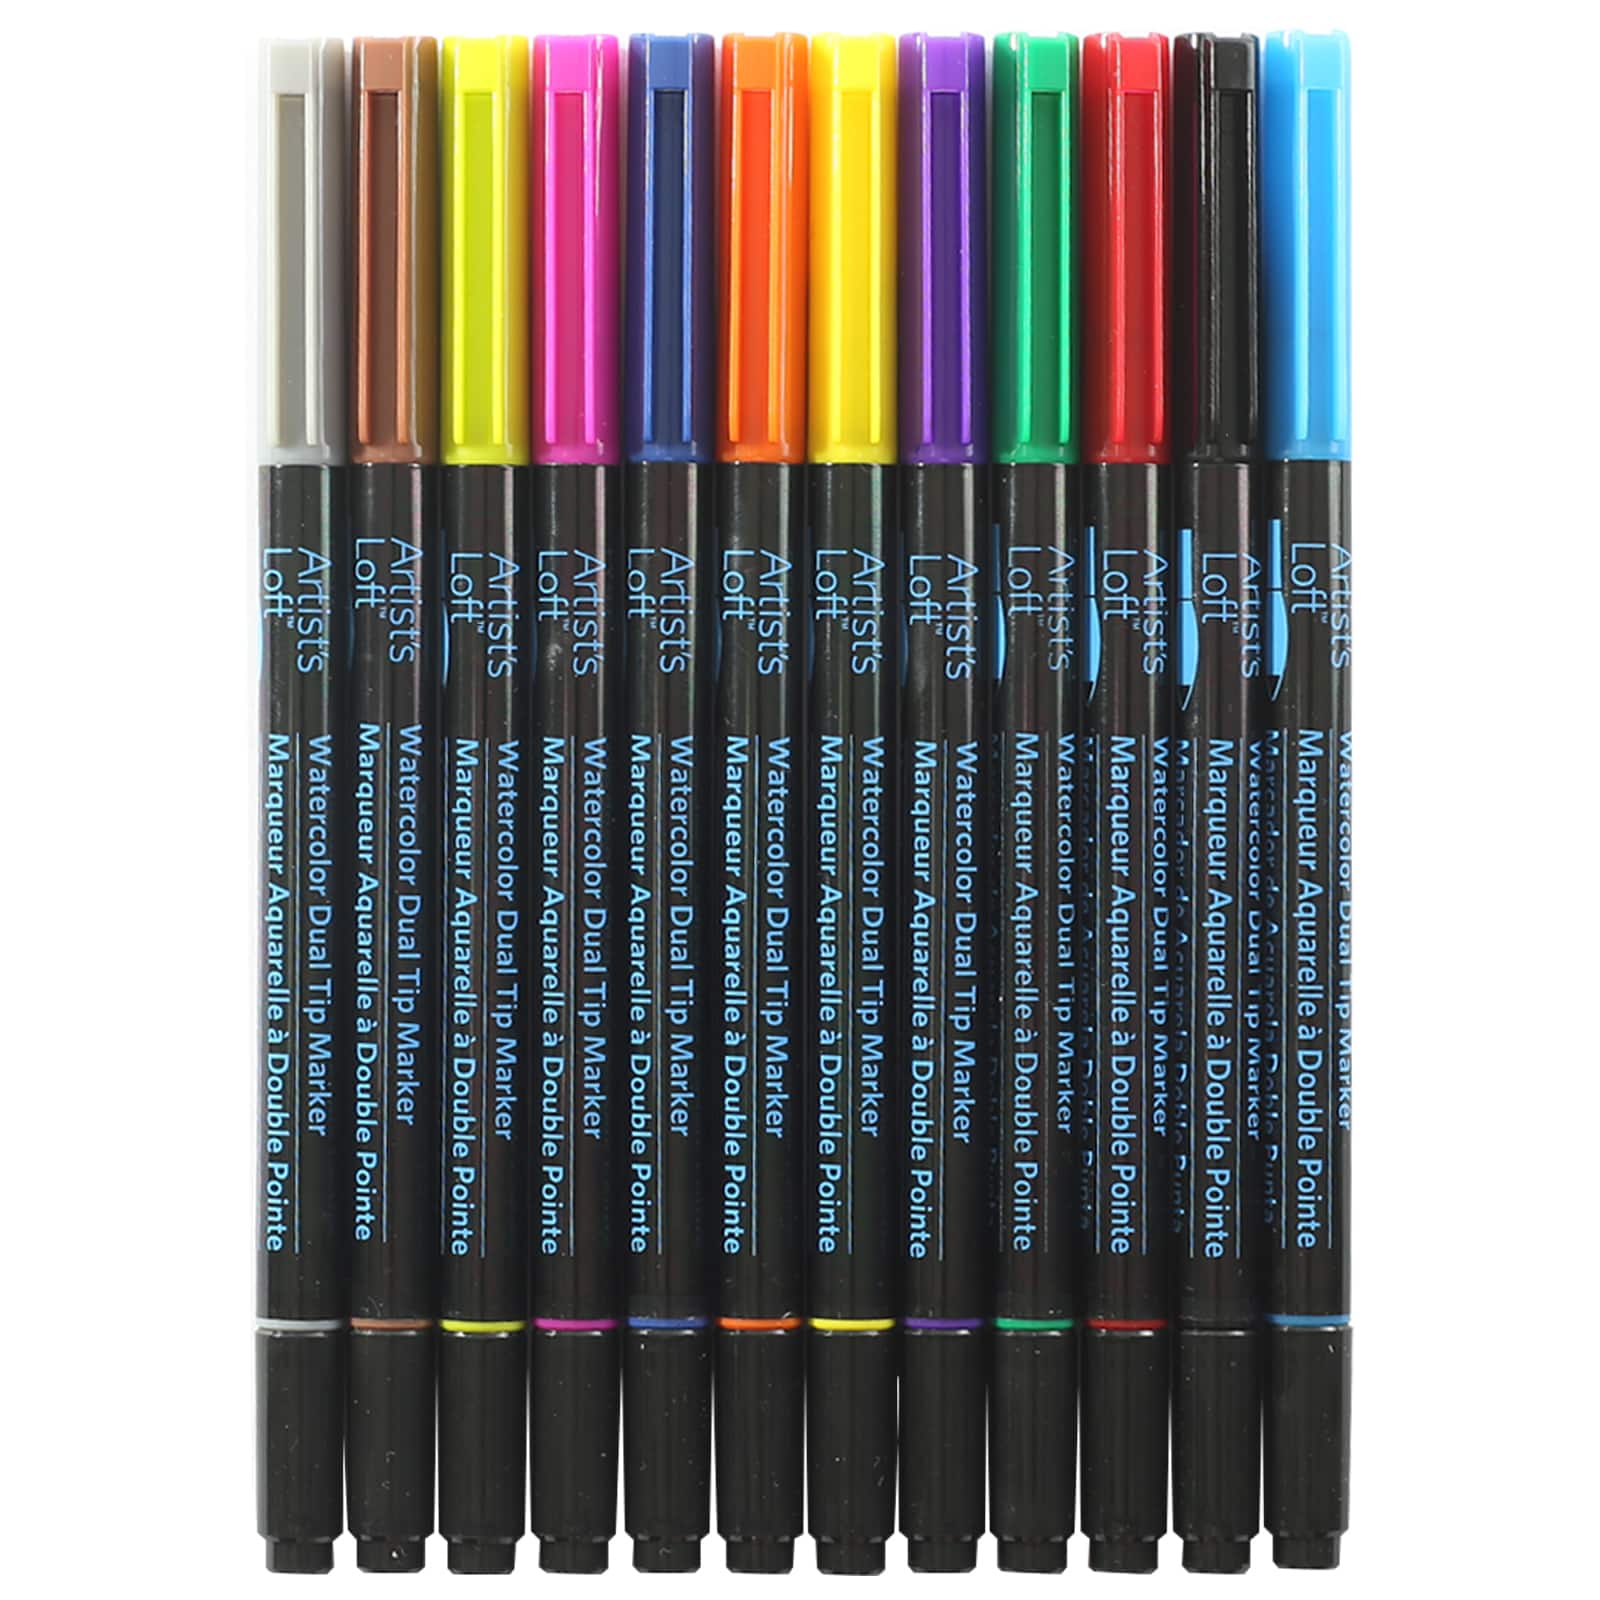 Watercolor Markers - The Art Store/Commercial Art Supply